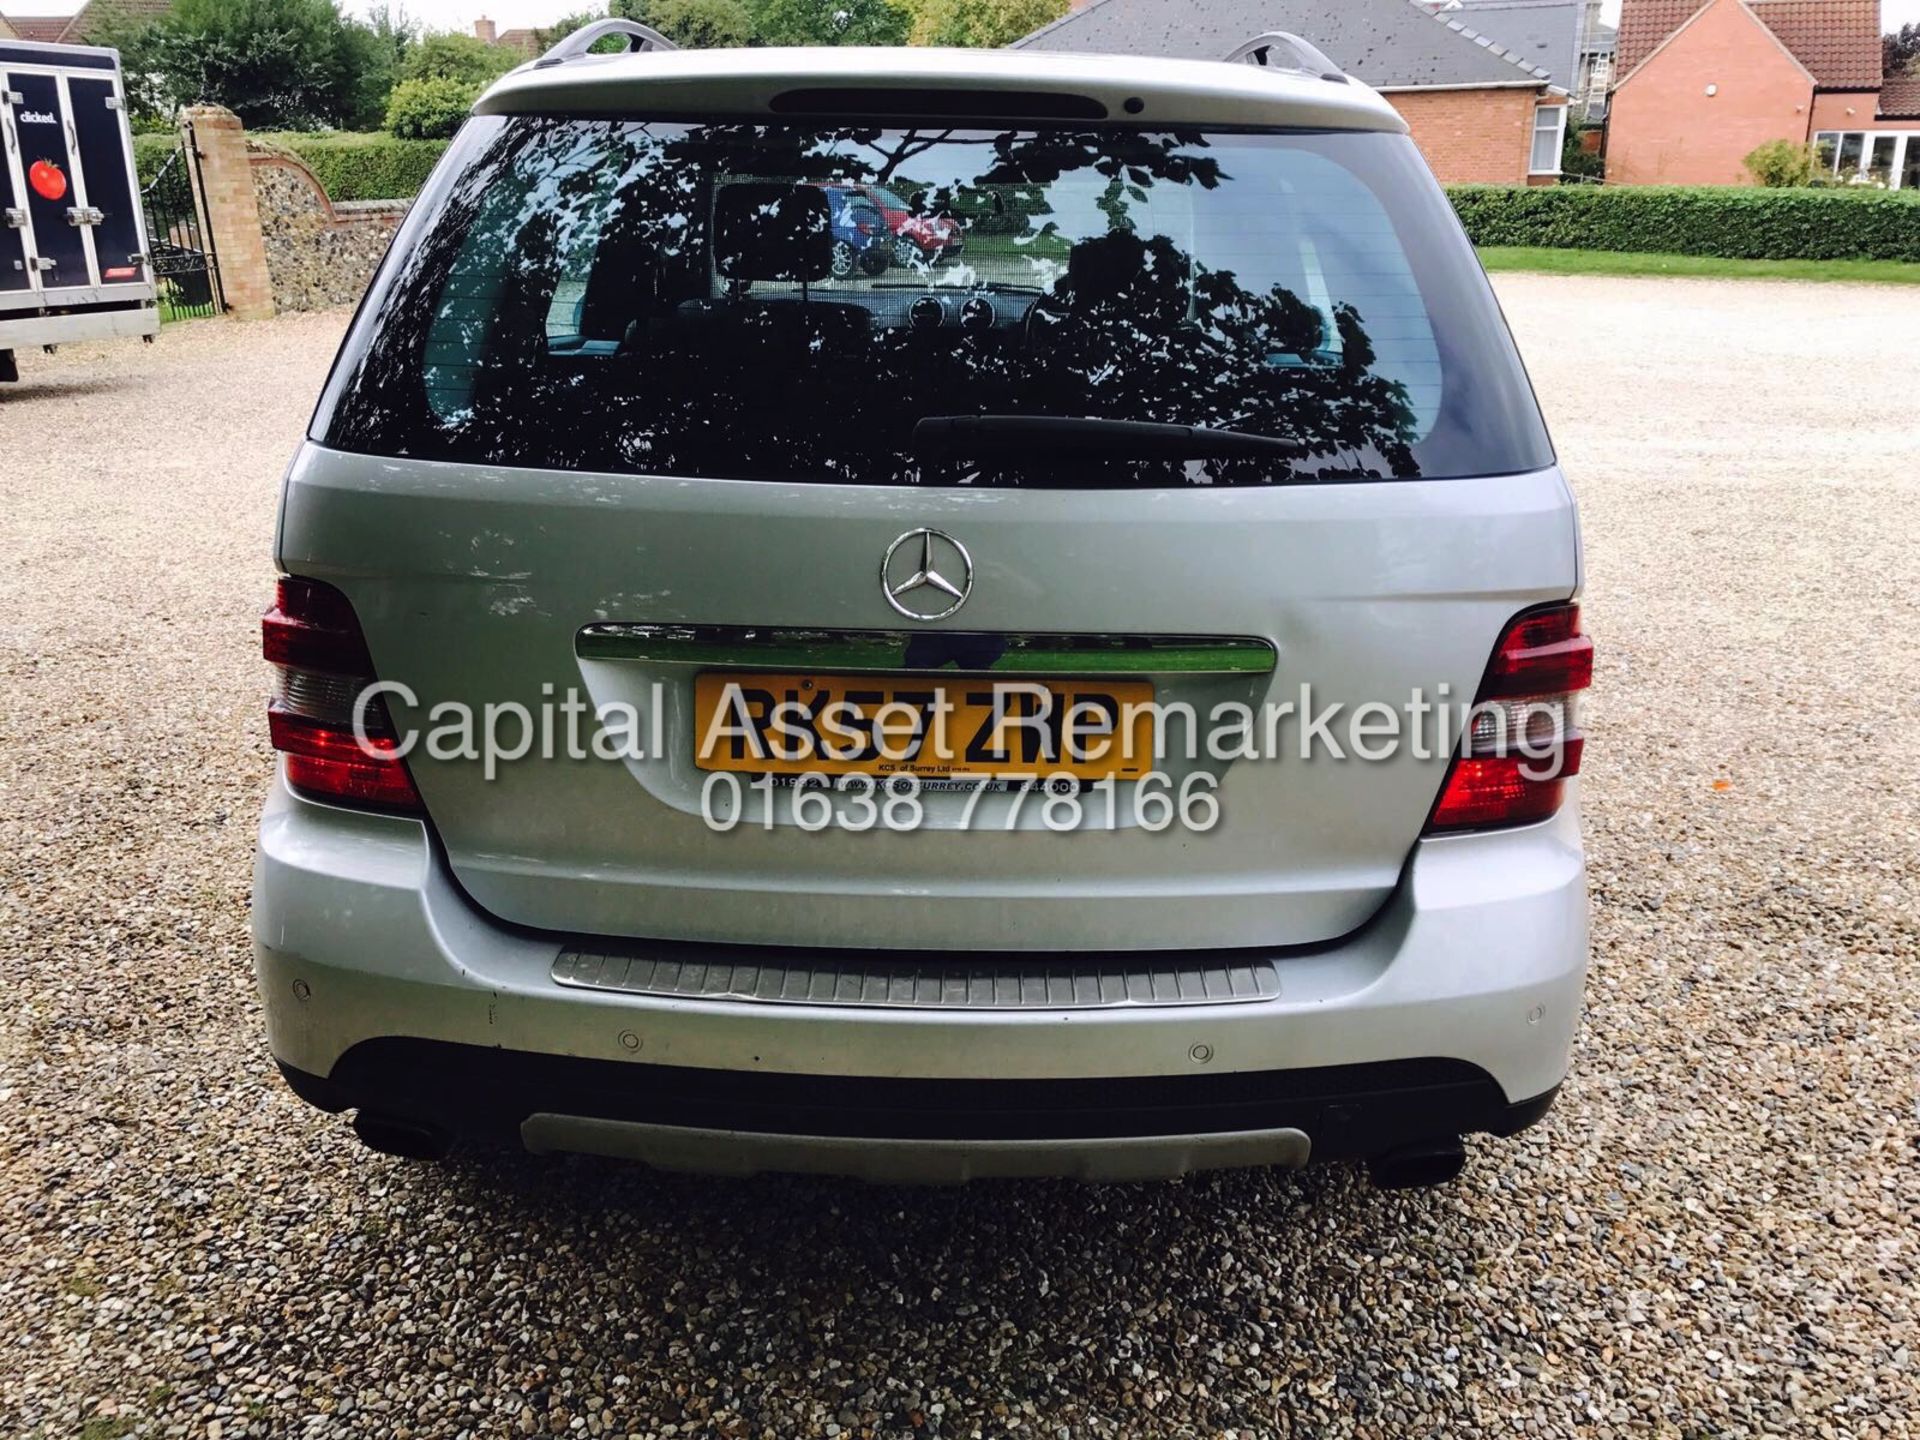 MERCEDES ML280CDI "EDITION S" AUTO 4MATIC (2008MODEL) 1 PREVIOUS OWNER FSH (NO VAT TO PAY ON HAMMER) - Image 5 of 16